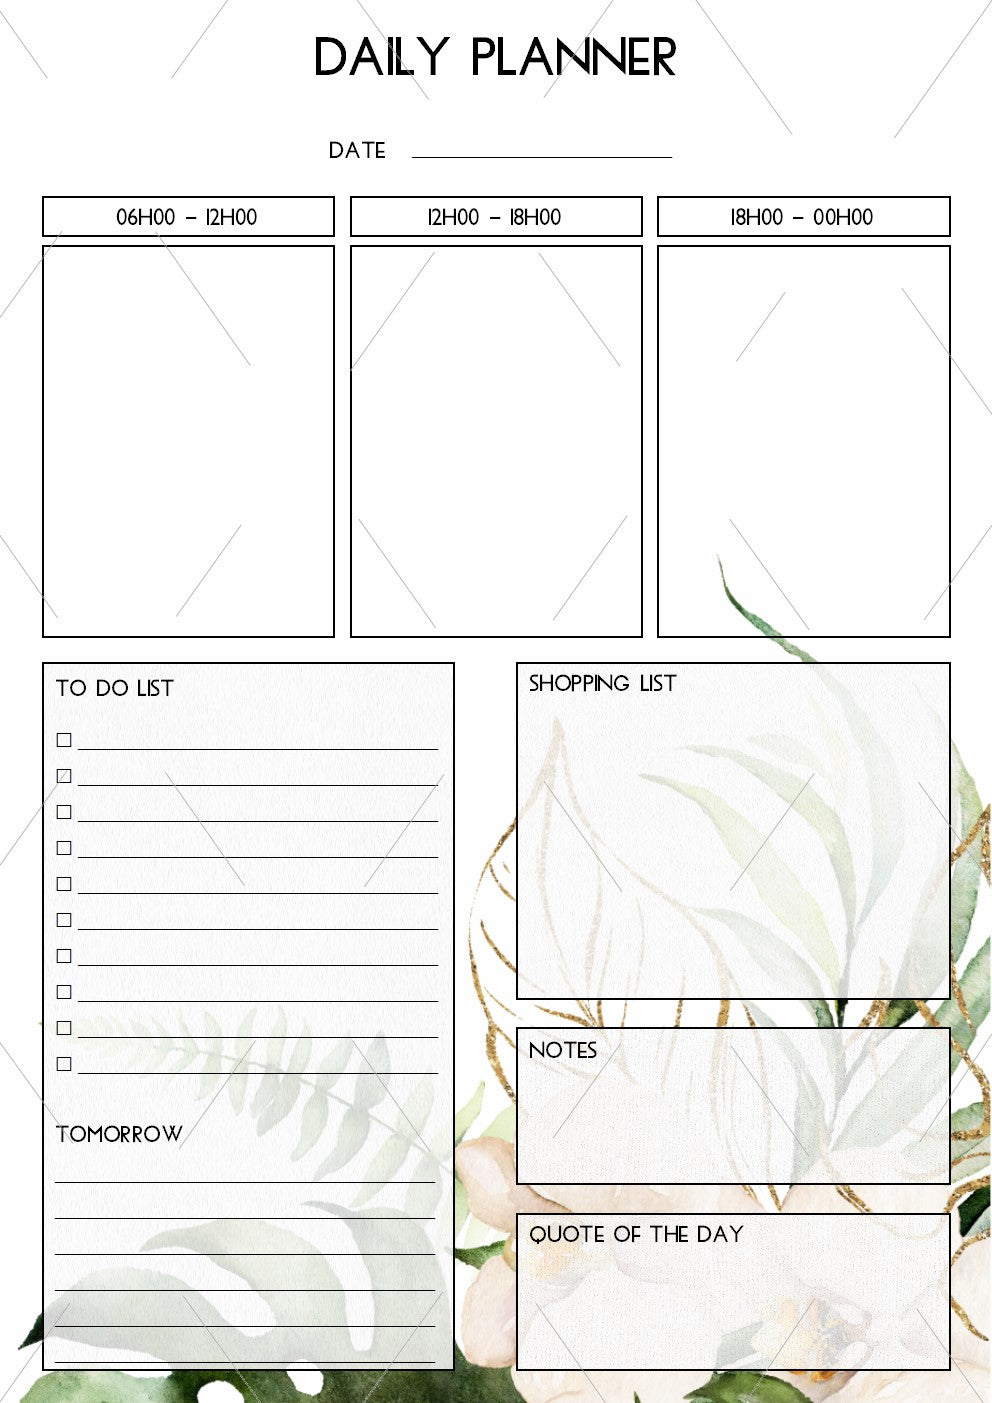 READY TO PRINT:  3-in-1 Planner - Goldenluscious